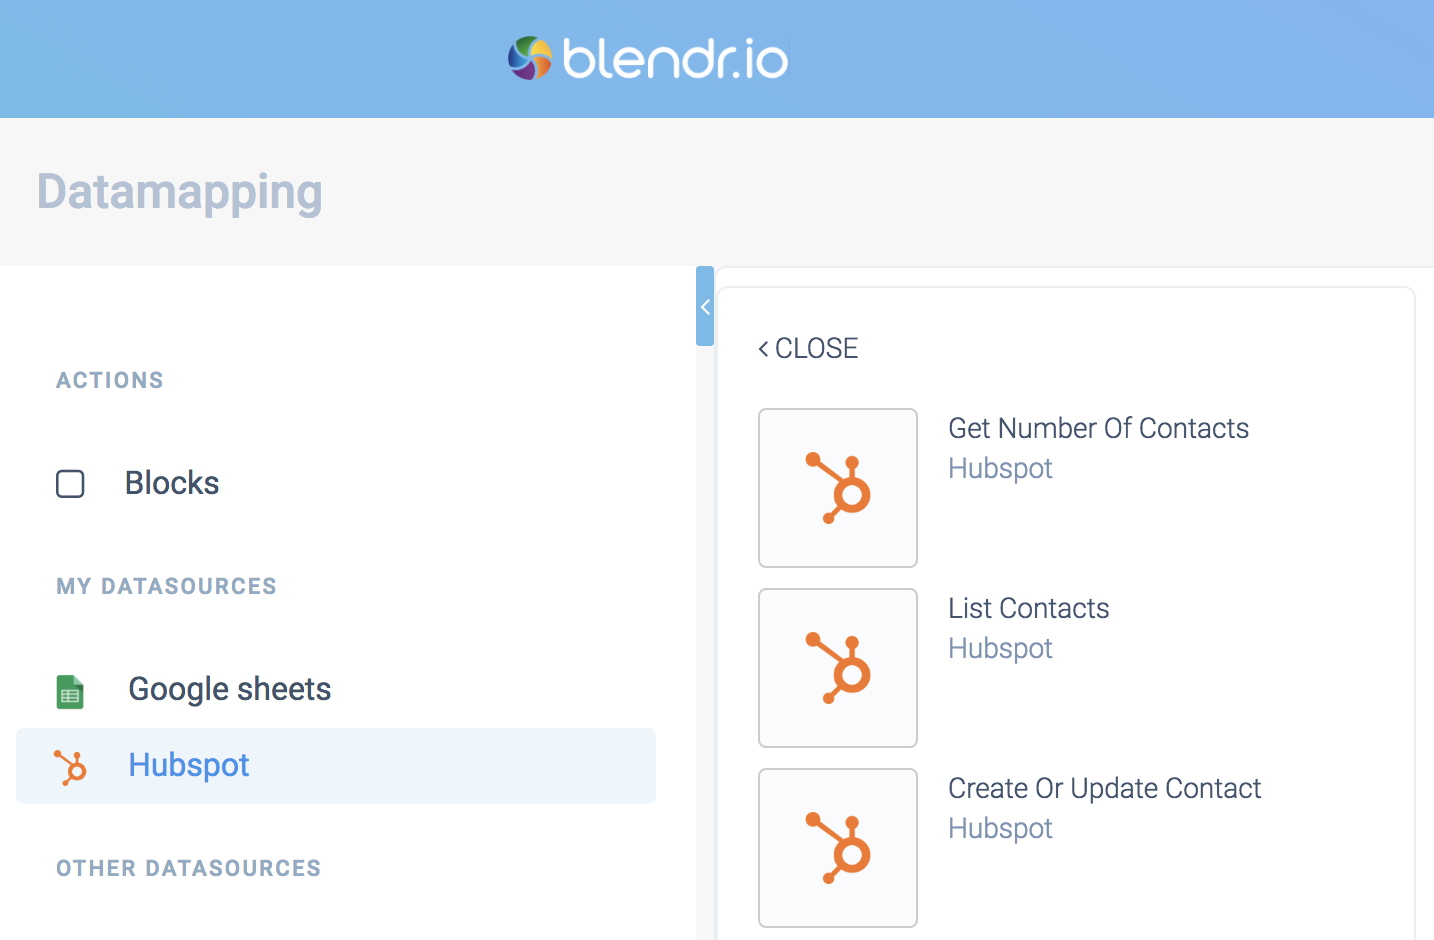 Blendr's datamapping page. Google sheets and Hubspot appear below My Datasources.